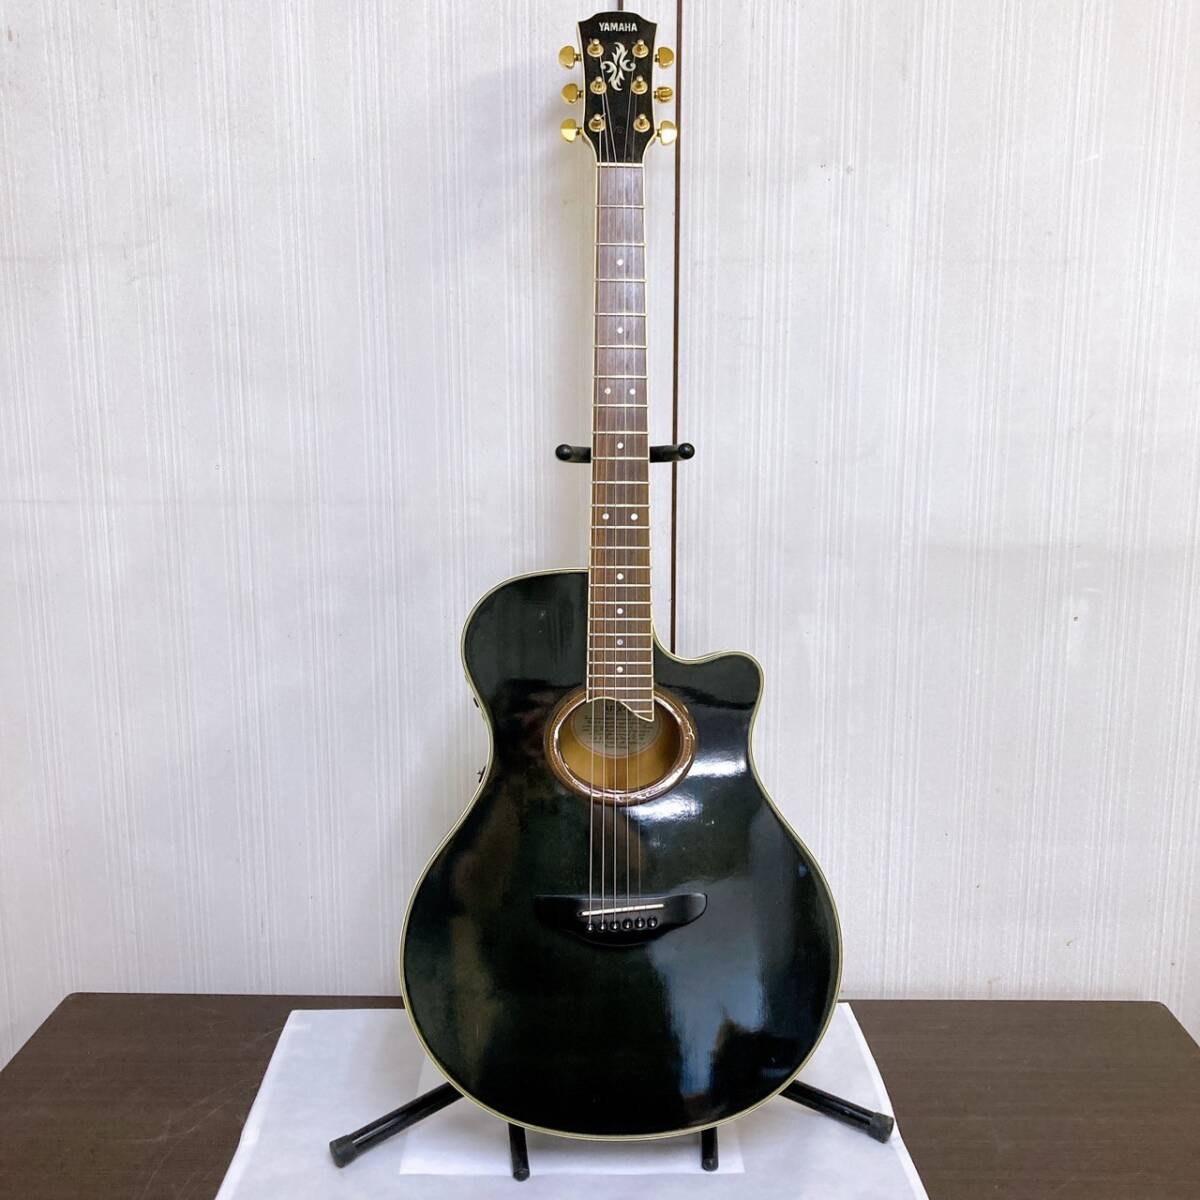 YAMAHA Yamaha APX-8 electric acoustic guitar electric acoustic guitar guitar acoustic guitar akogi musical instruments hard case attaching /YS1488- home 180